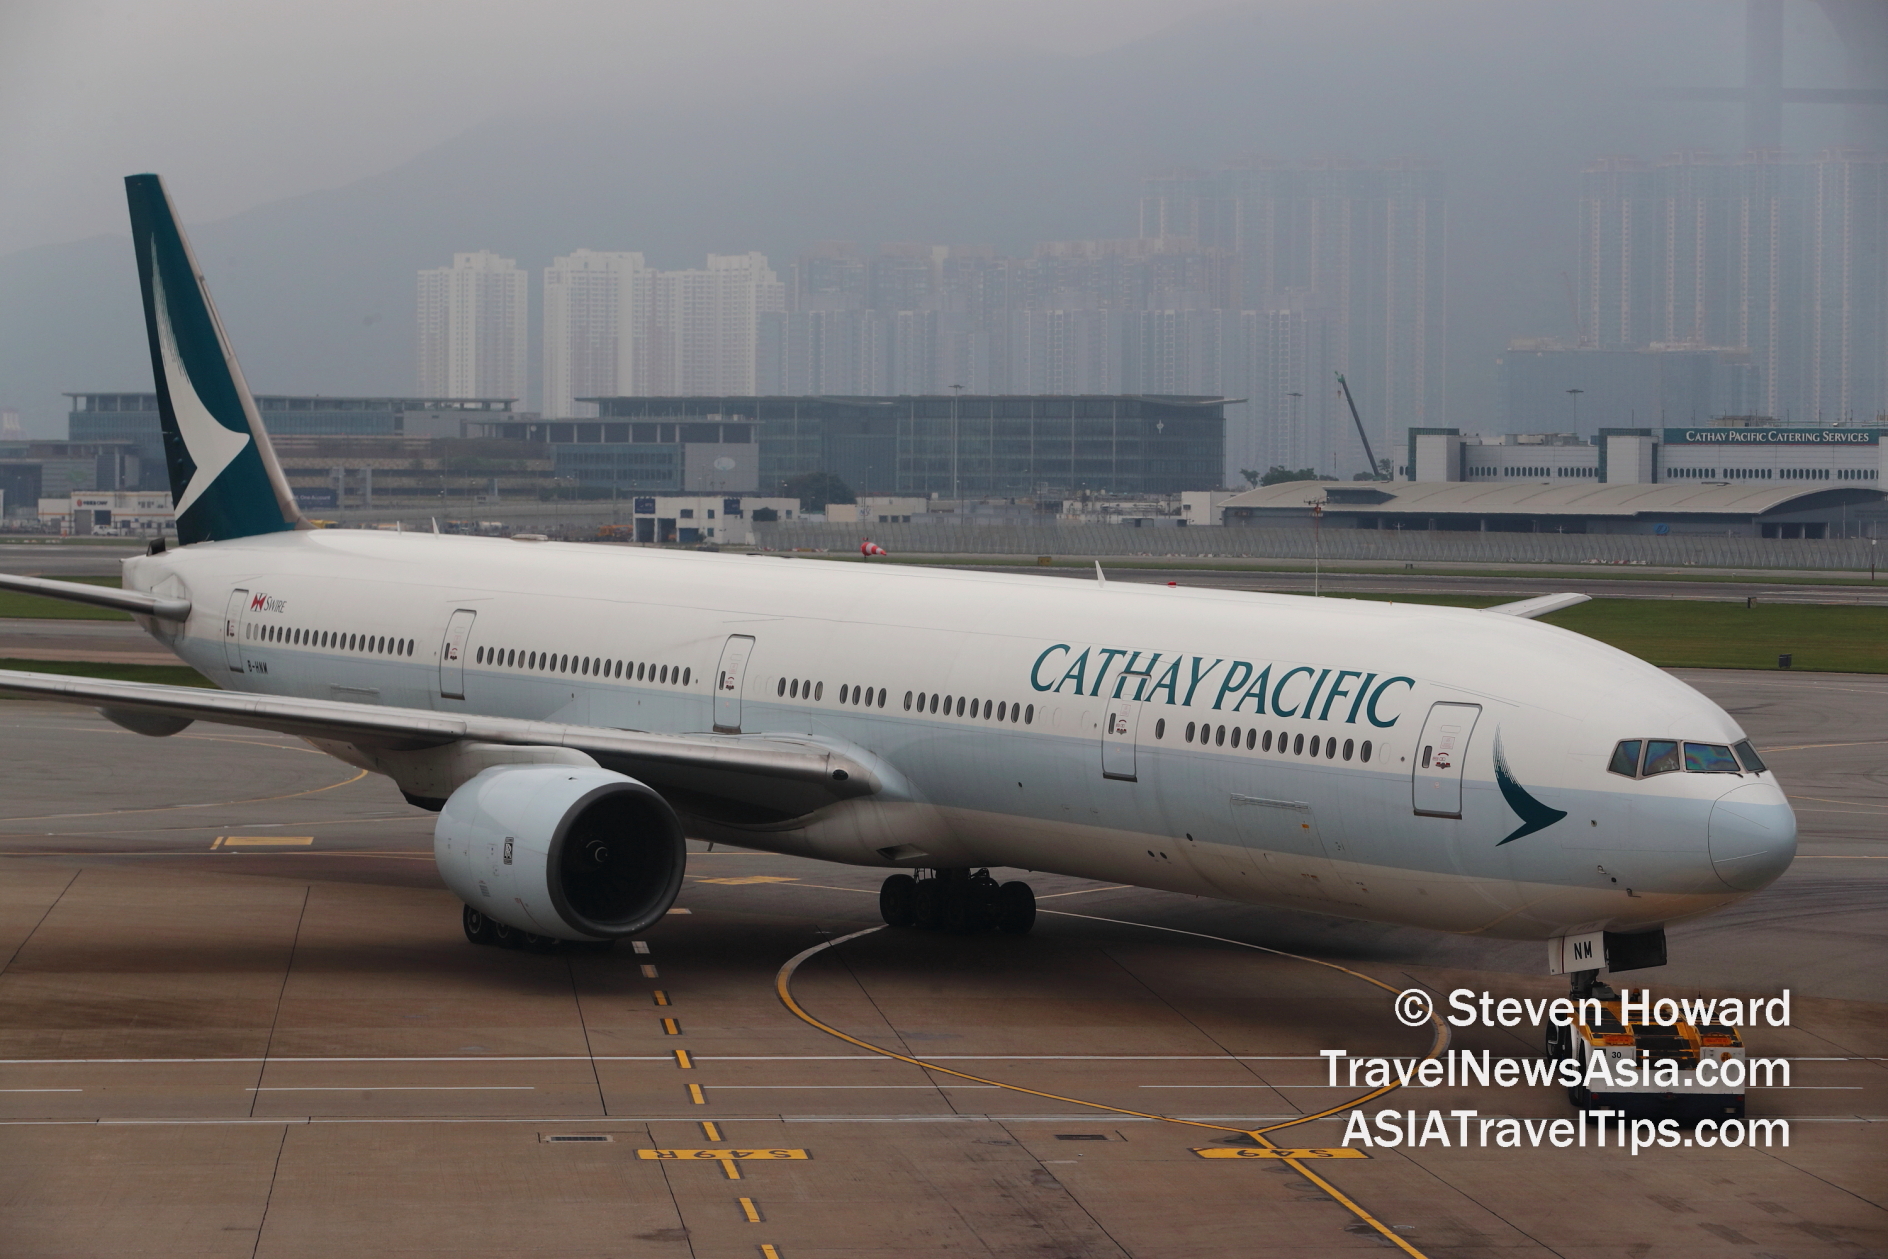 Cathay Pacific Boeing 777-300 reg: B-HNM. Picture by Steven Howard of TravelNewsAsia.com Click to enlarge.